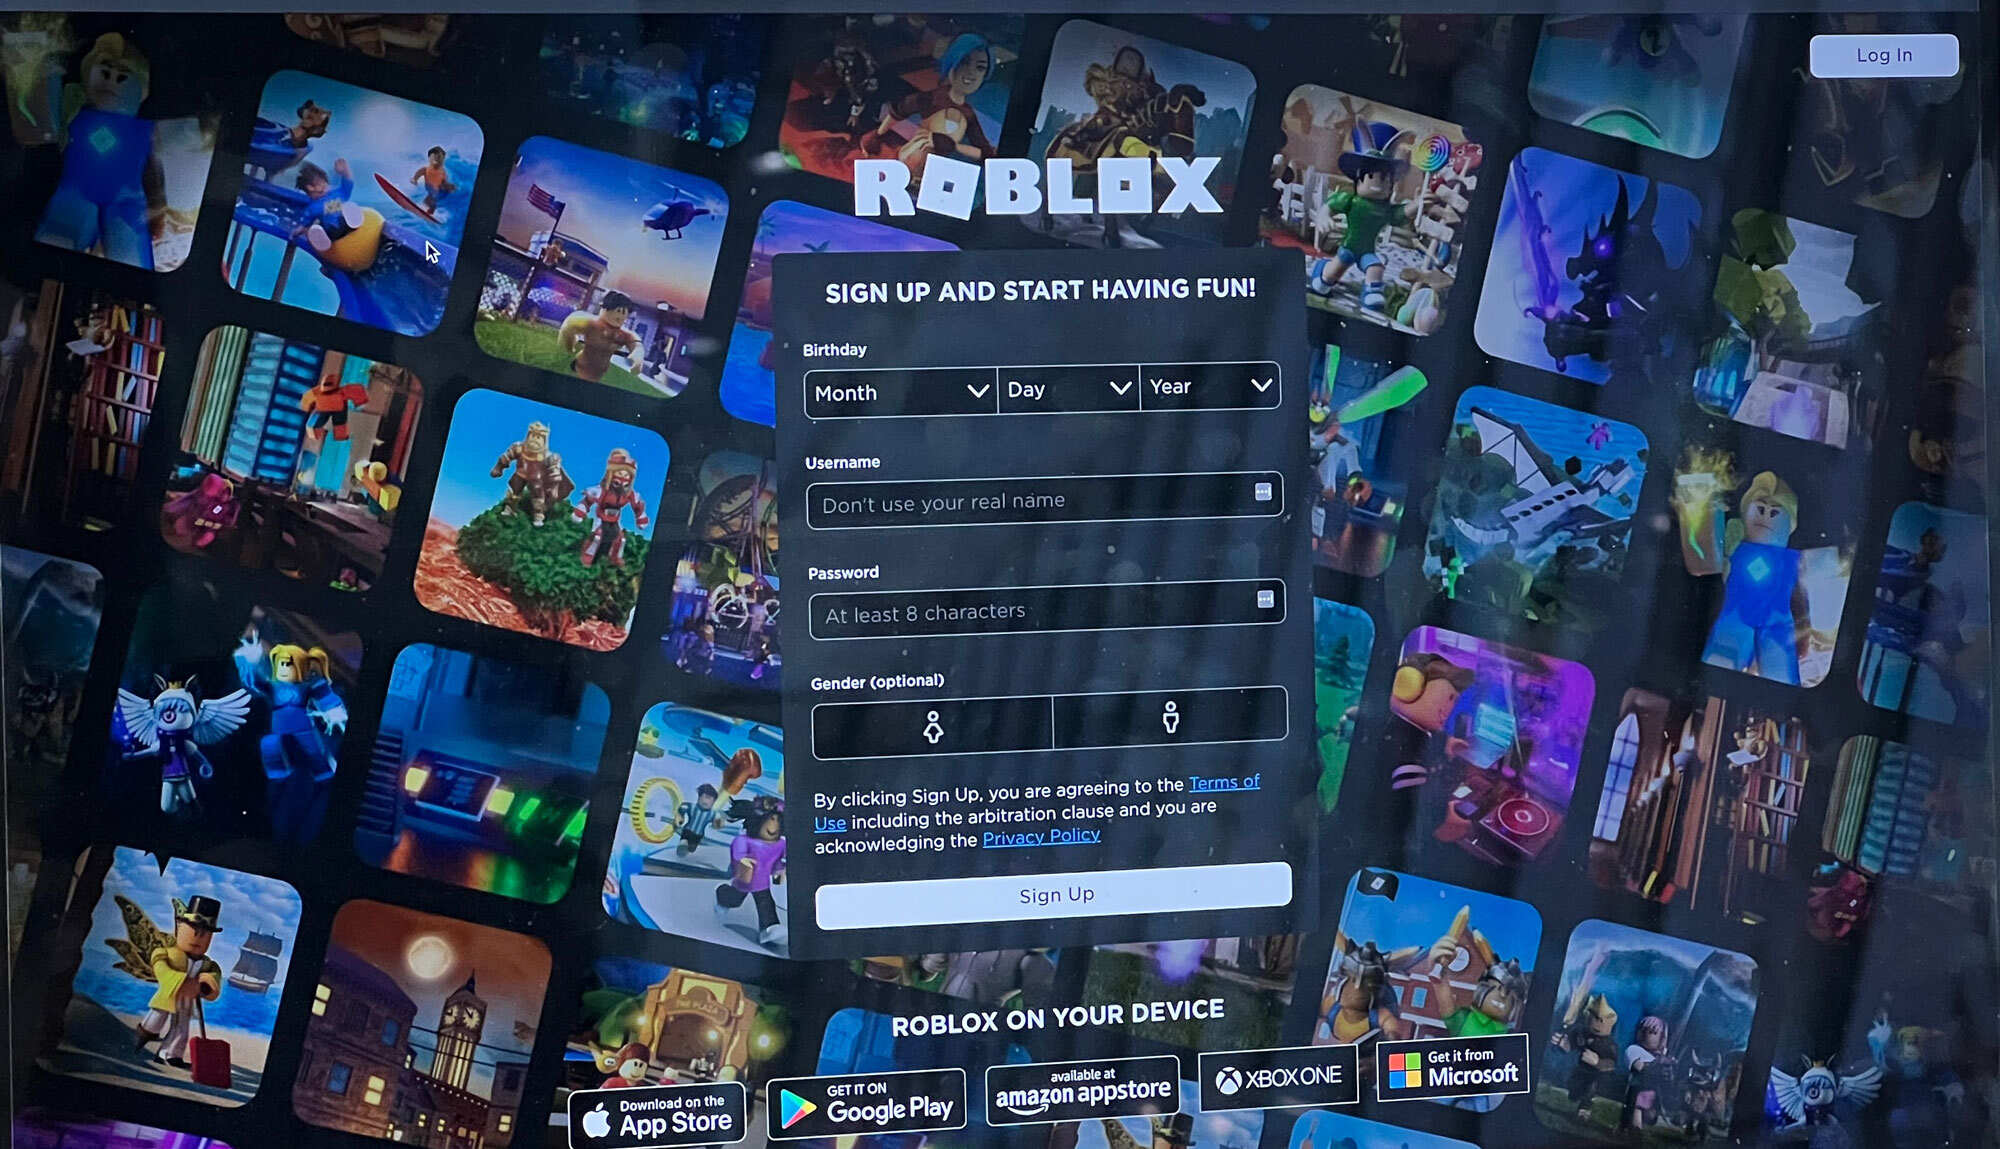 I published the first-ever Roblox extension on iOS to AppStore